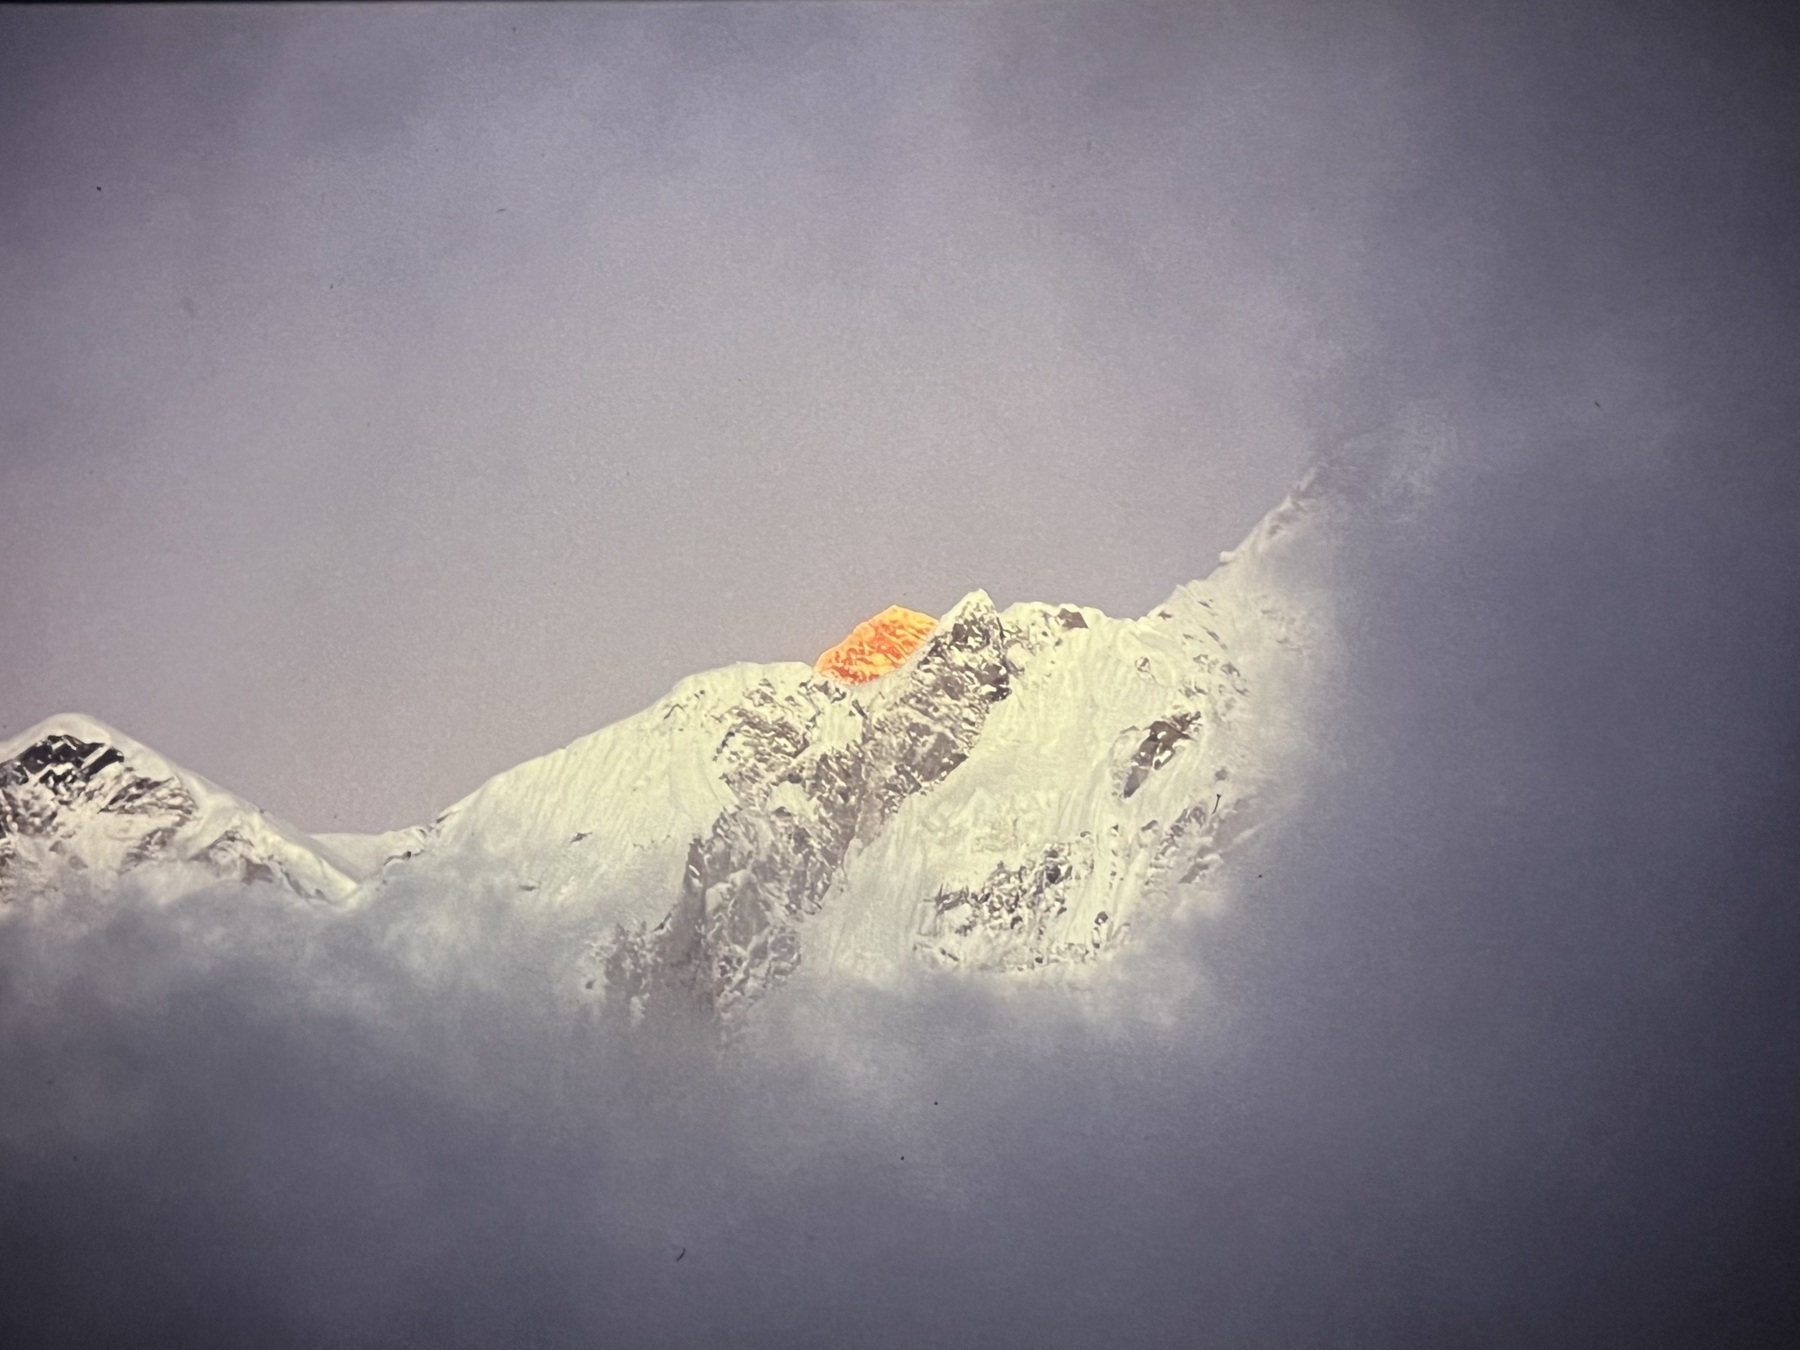 The summit of Mt Everest, peeking out from behind surrounding mountains, coloured orange as it catches the last rays of sunlight at the end of the day. Clouds are building up